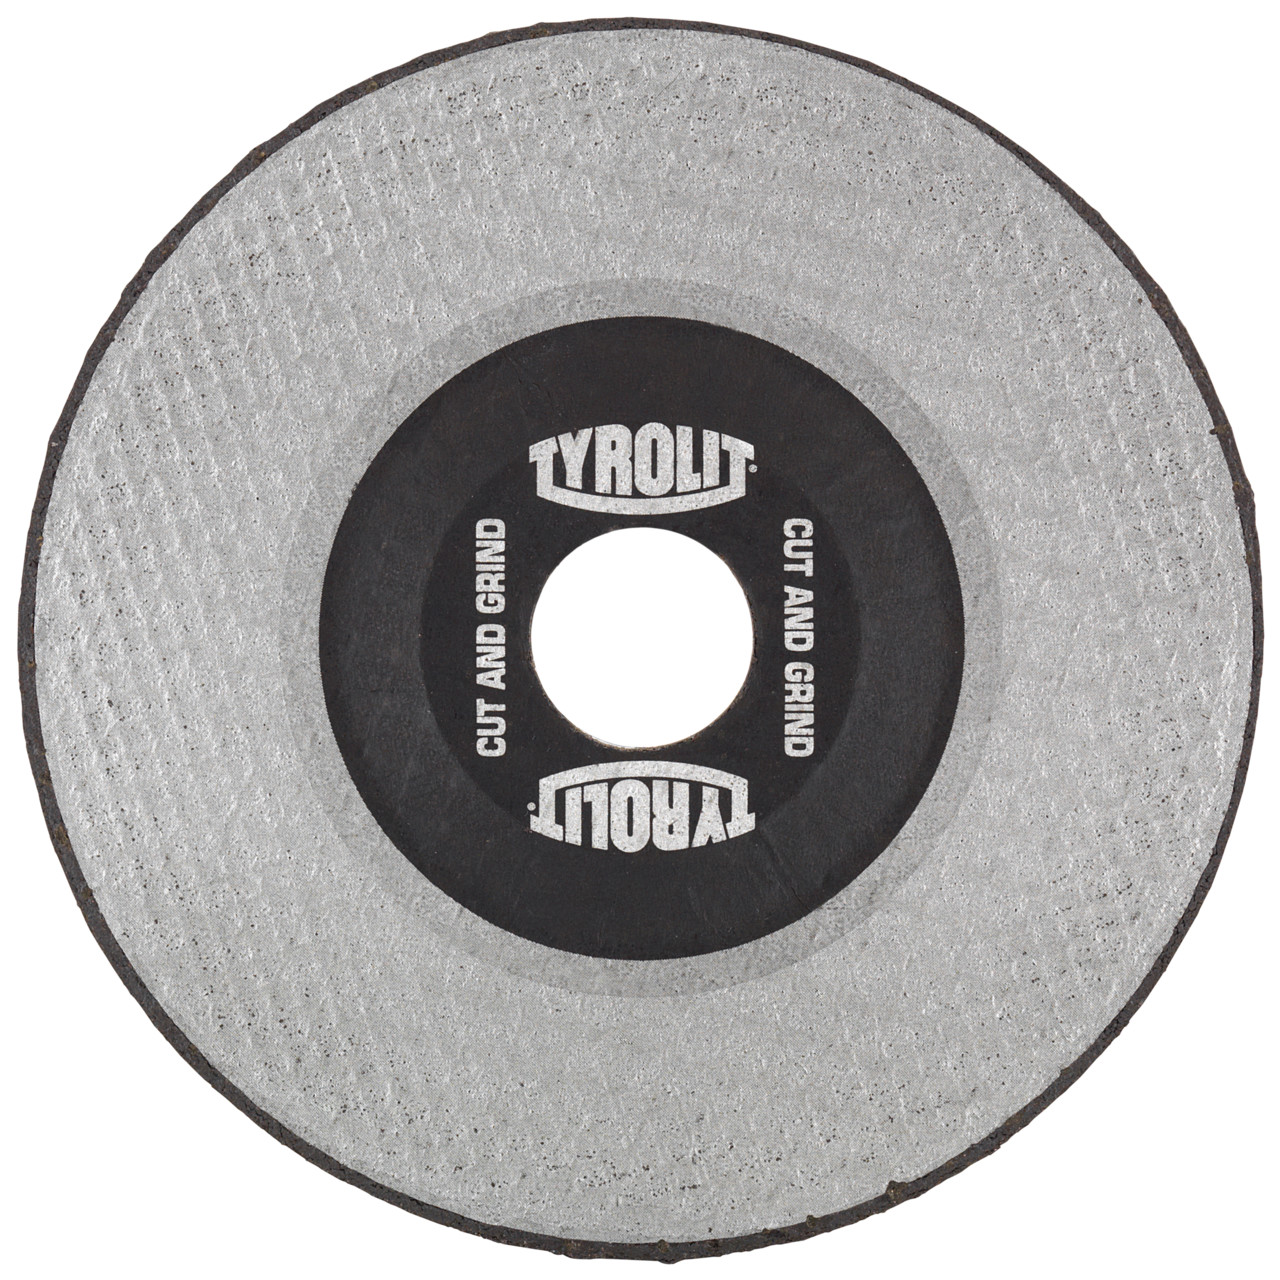 Tyrolit Cutting disc CUT AND GRIND DxUxH 115x2x22.23 With DEEP Cut Protection for steel and stainless steel, shape: 27 - offset version, Art. 34042756